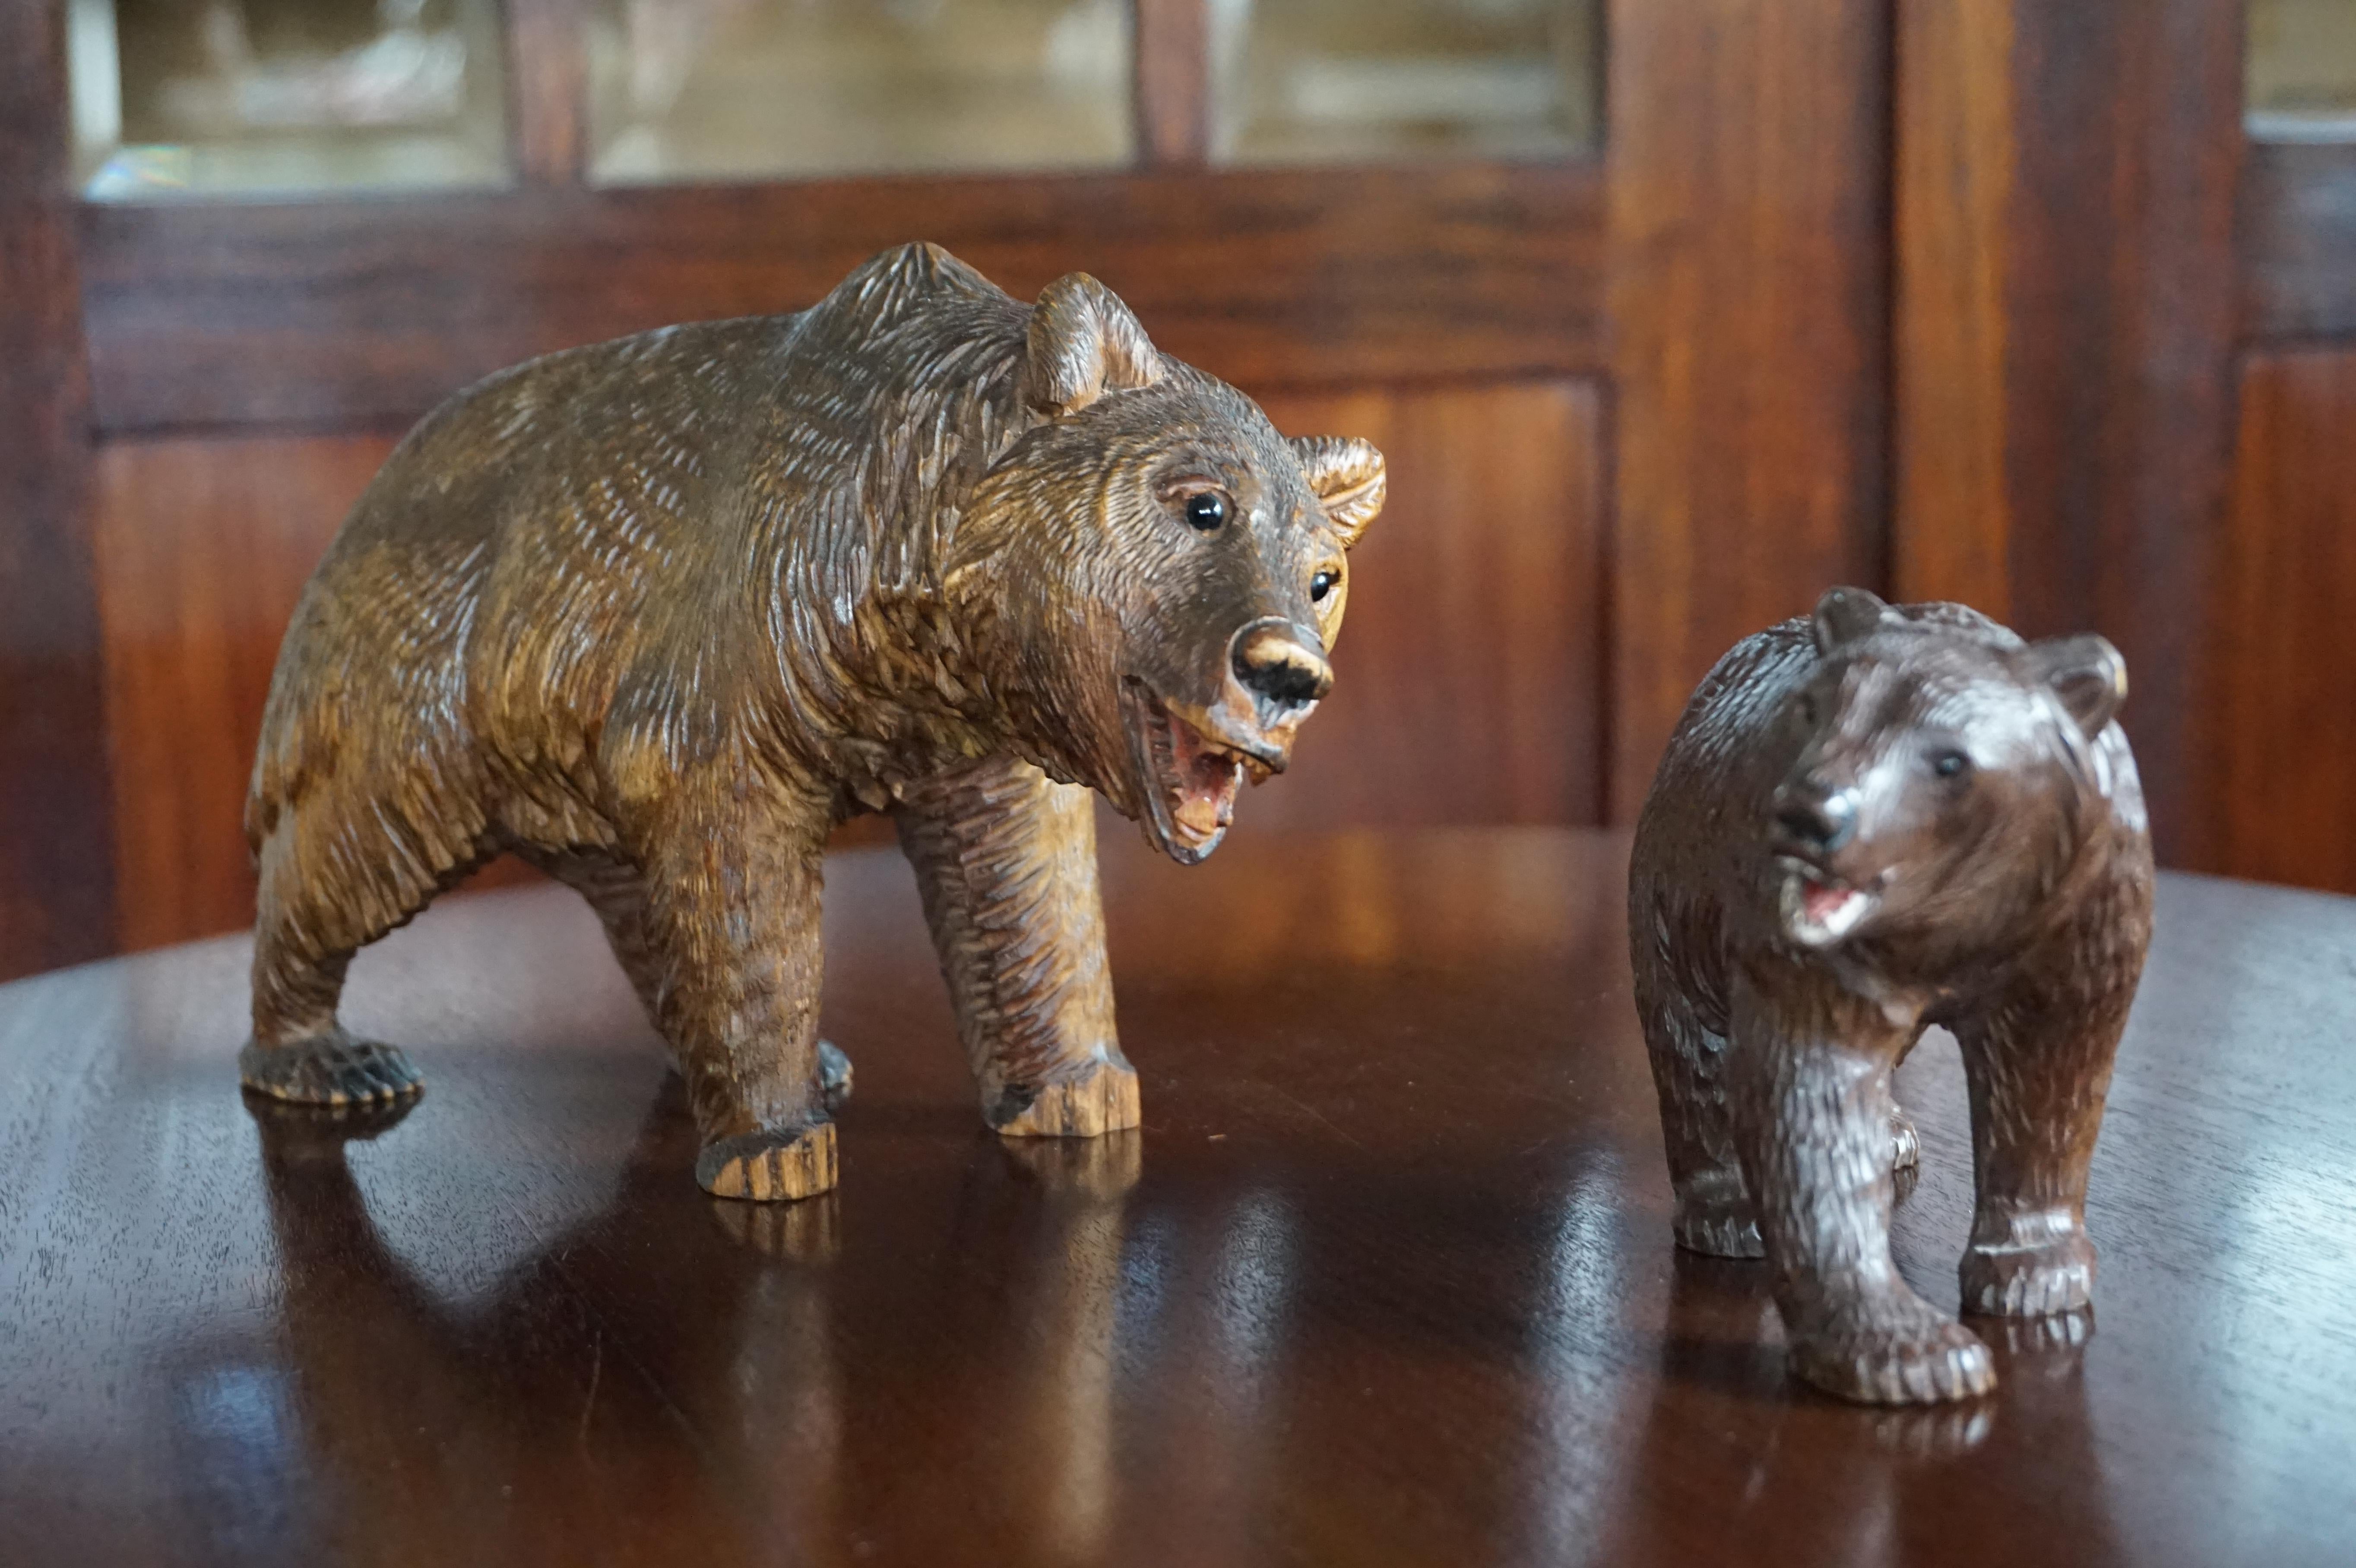 Beautifully carved and highly decorative pair or walking bears.

If you are looking to start a collection or if you are looking for an artistic and original gift for a bear lover then these two could be perfect. Papa bear and junior can be placed